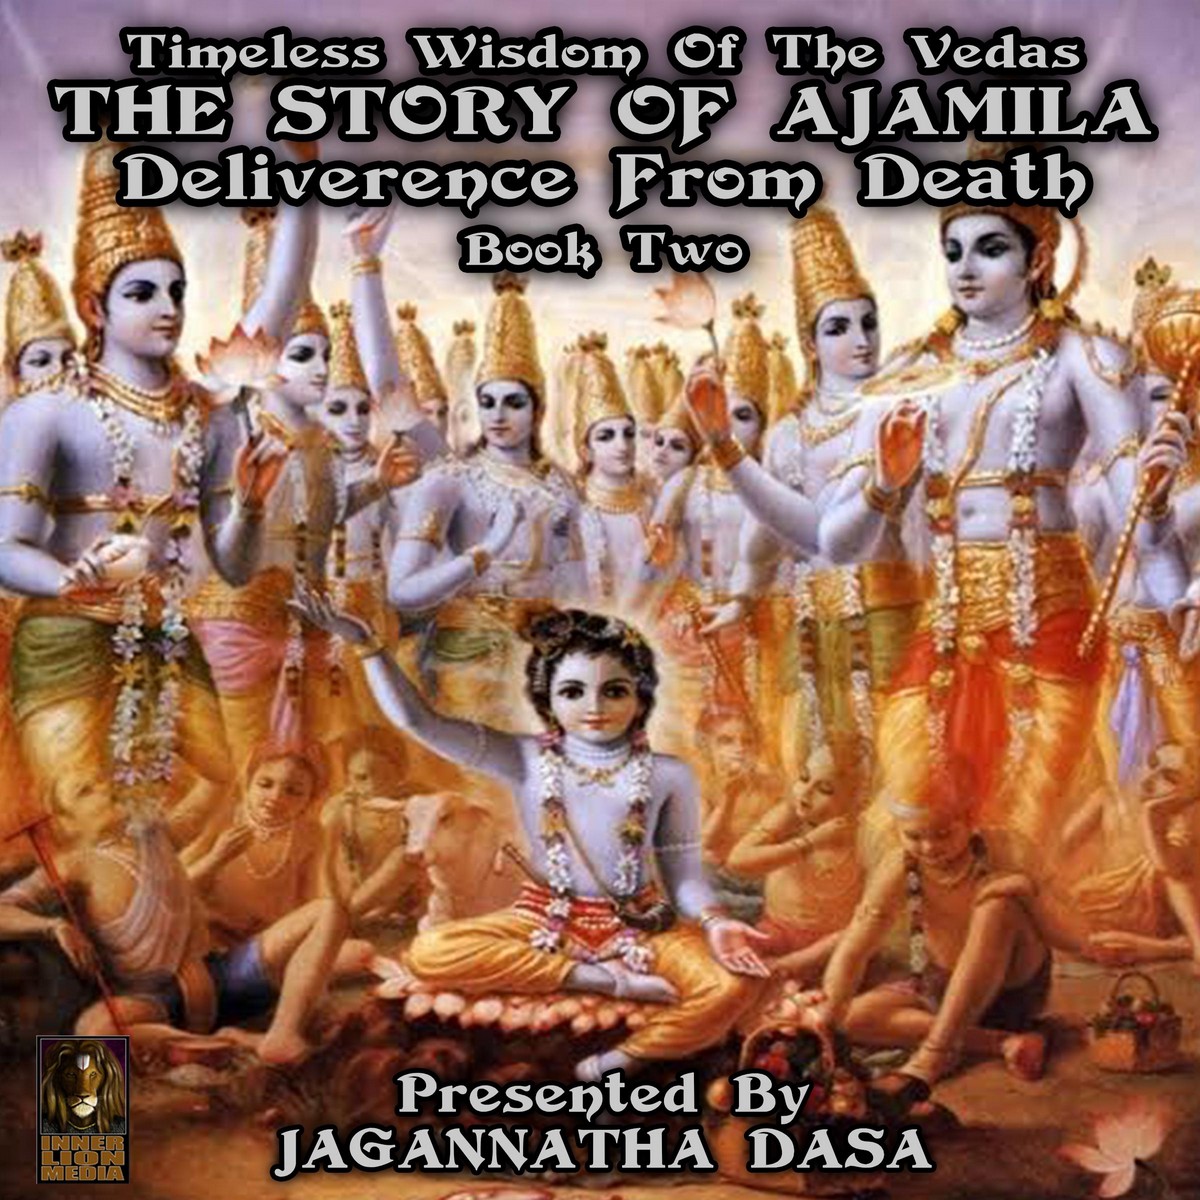 Timeless Wisdom Of The Vedas The Story Of Ajamila Deliverence From Death – Book Two